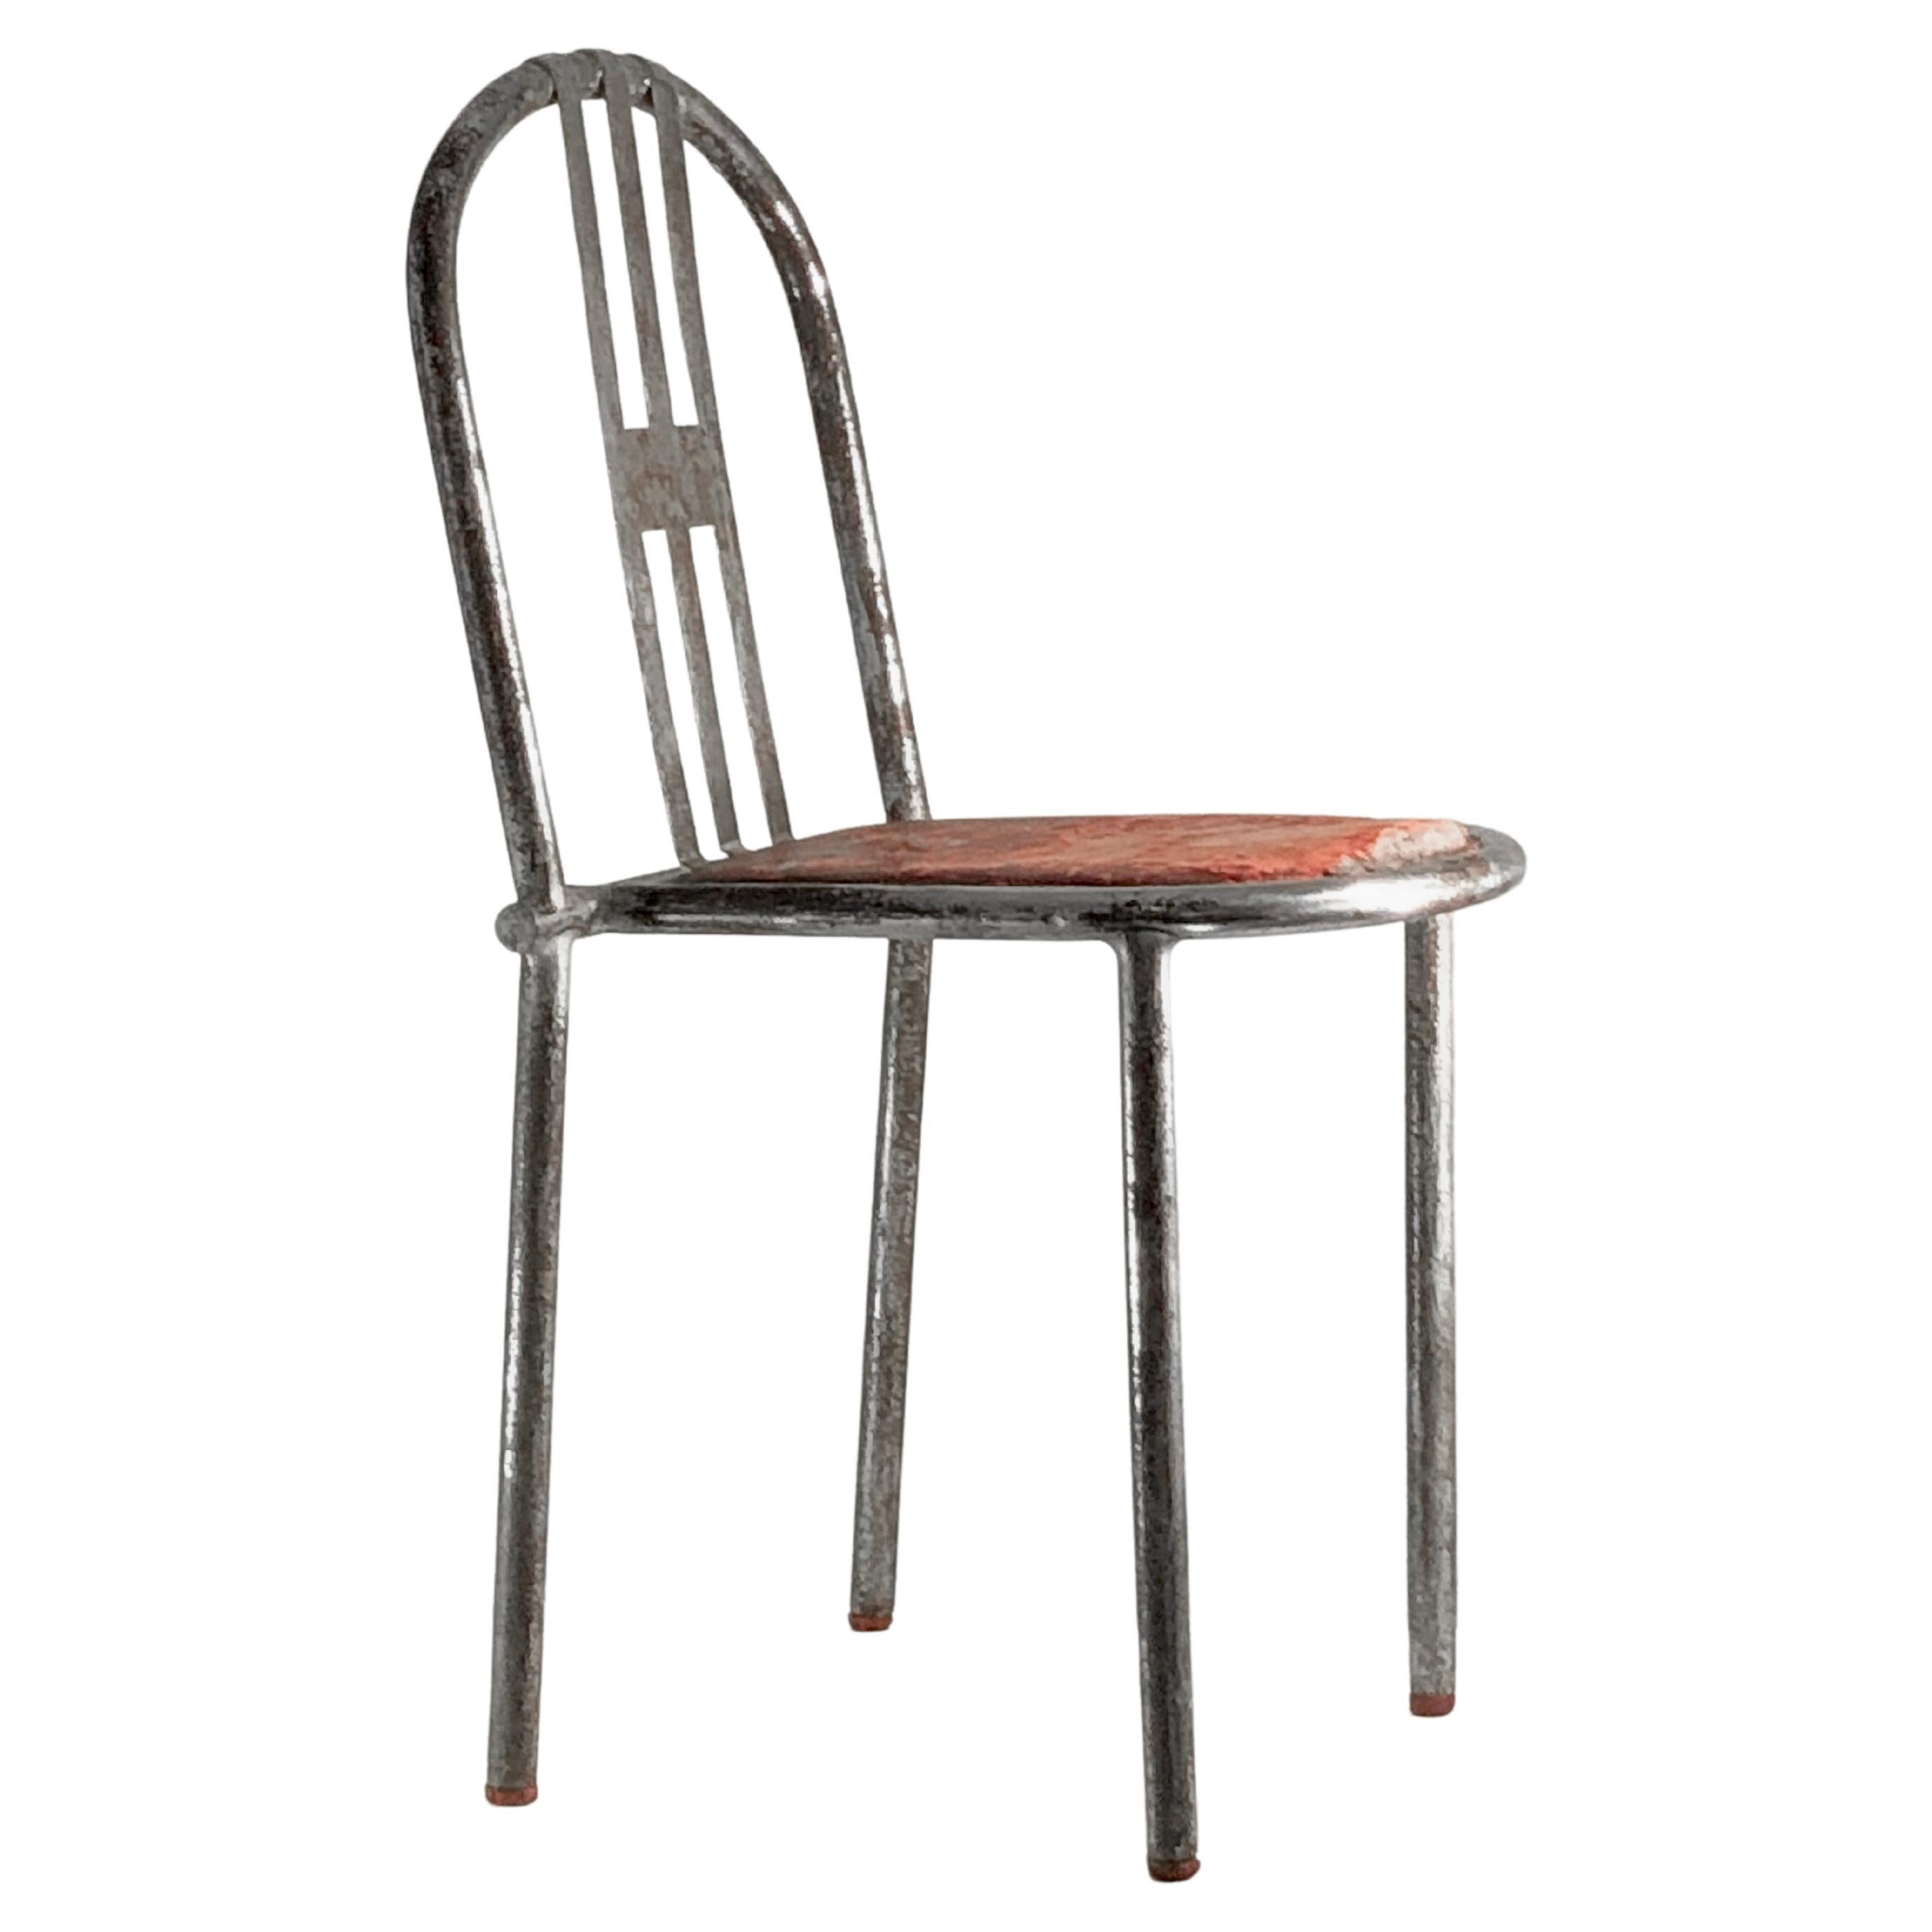 An Authentic EARLY MODERNIST Chair by ROBERT MALLET-STEVENS, TUBOR, France 1925 For Sale